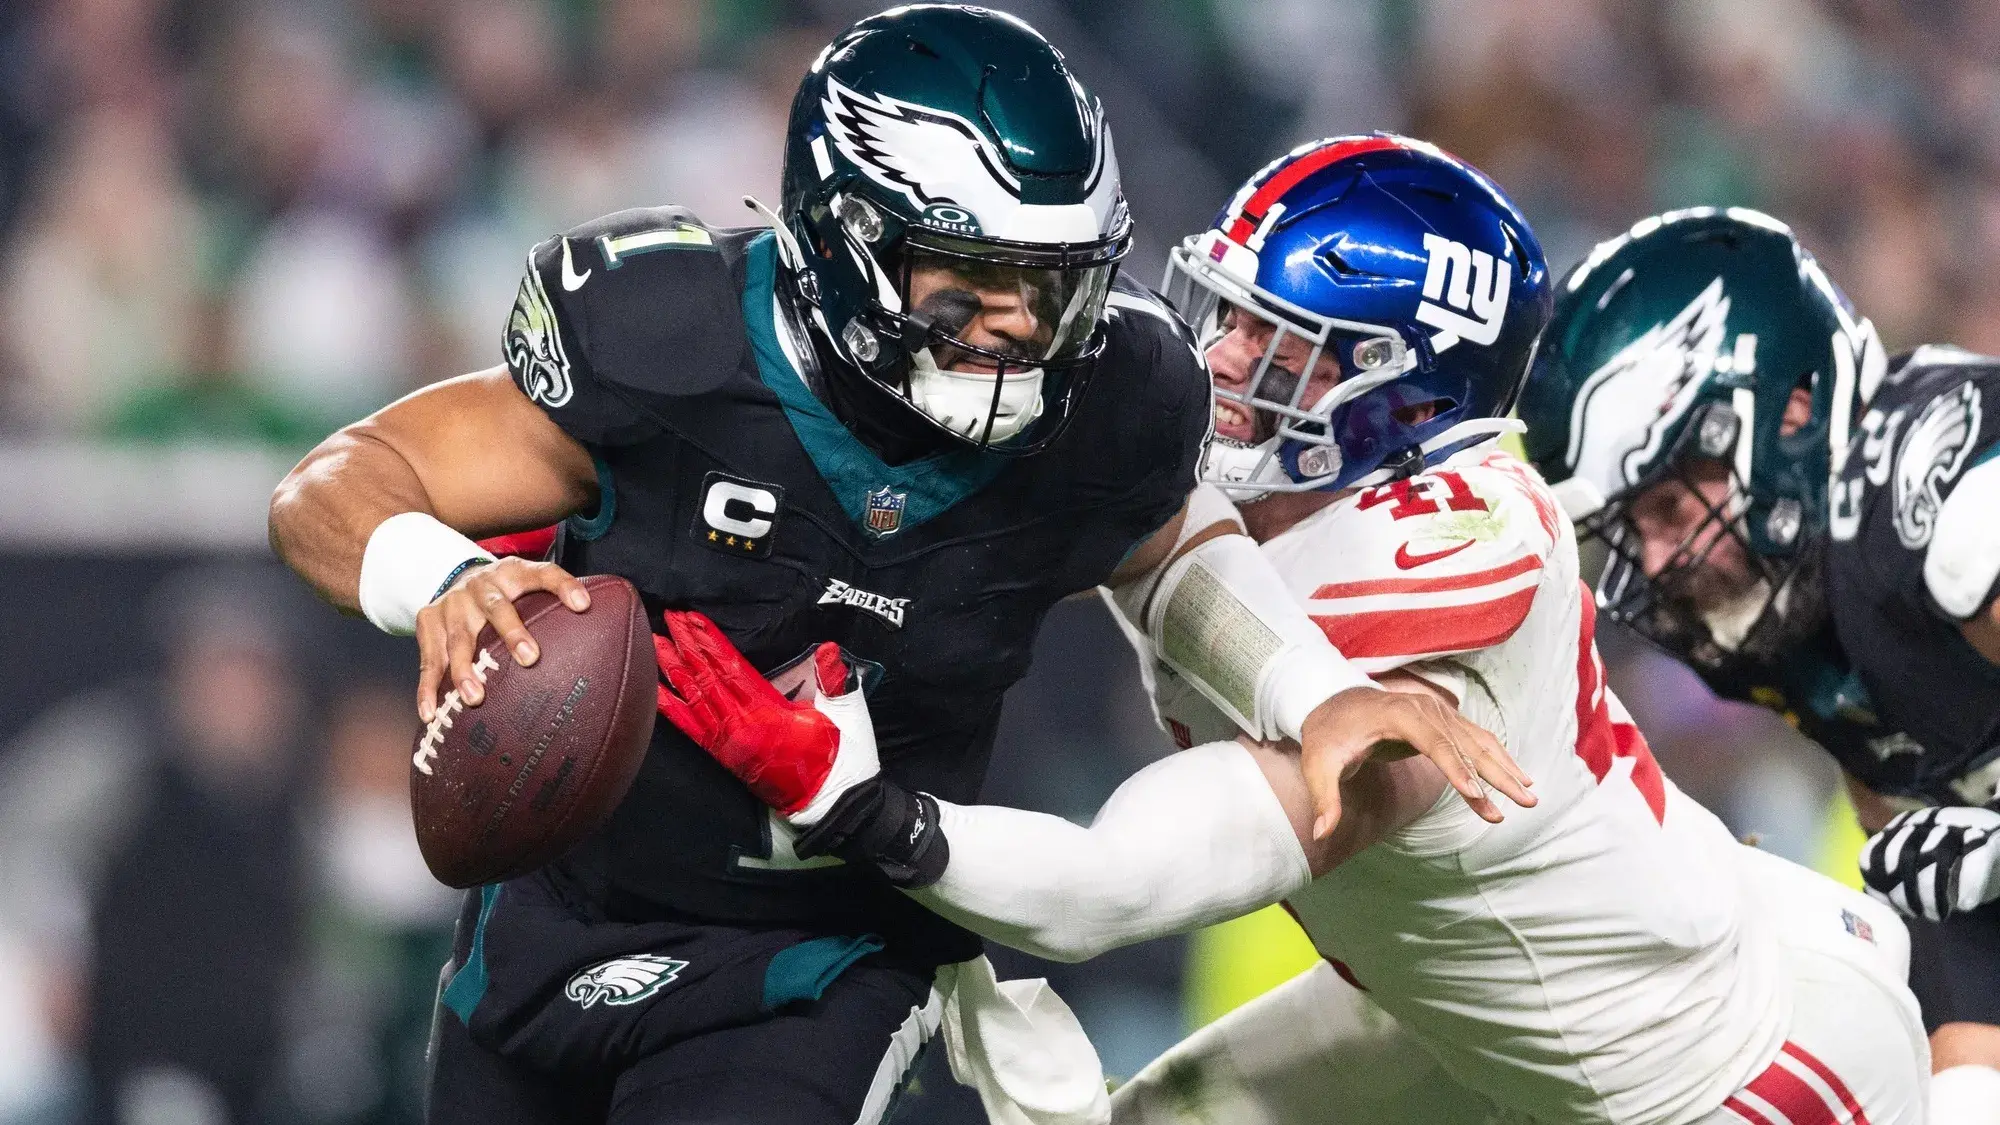 Philadelphia Eagles quarterback Jalen Hurts (1) eludes the tackle attempt of New York Giants linebacker Micah McFadden (41) during the second quarter at Lincoln Financial Field. / Bill Streicher-USA TODAY Sports